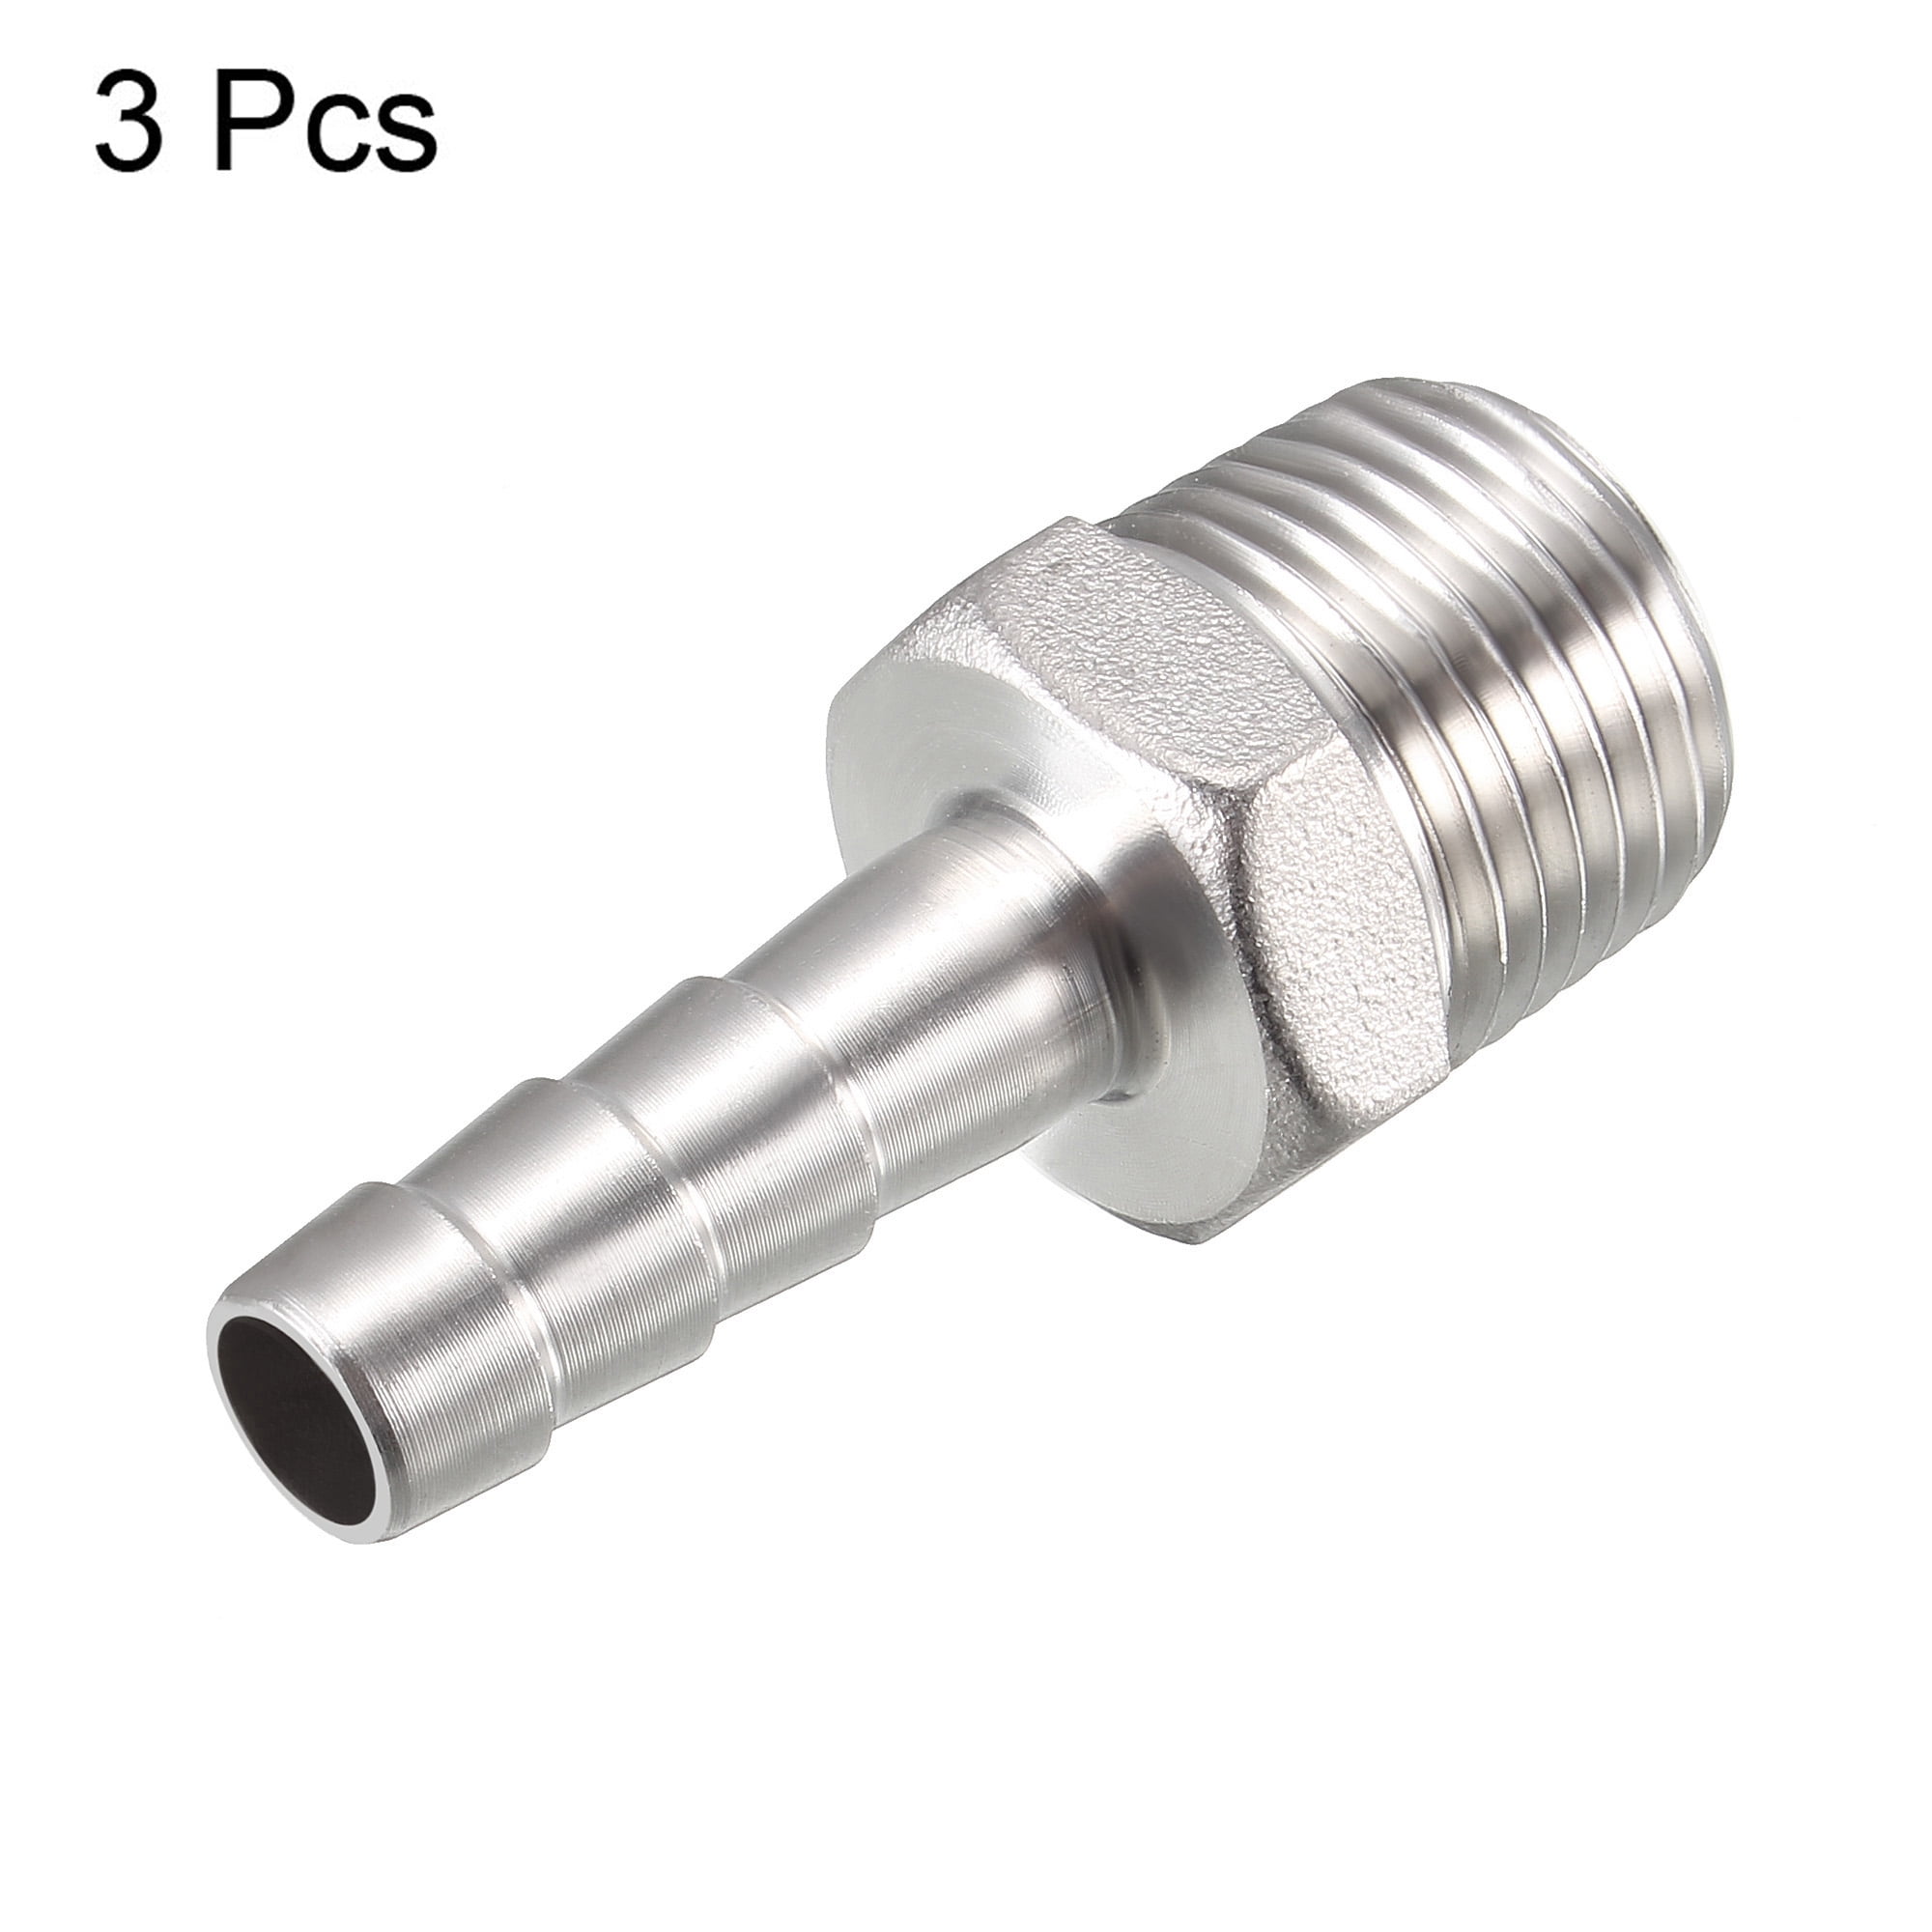 Details about   Stainless Steel Barb Hose Fitting Connector 10mm Barbed x G1/2 Male Pipe 3pcs 